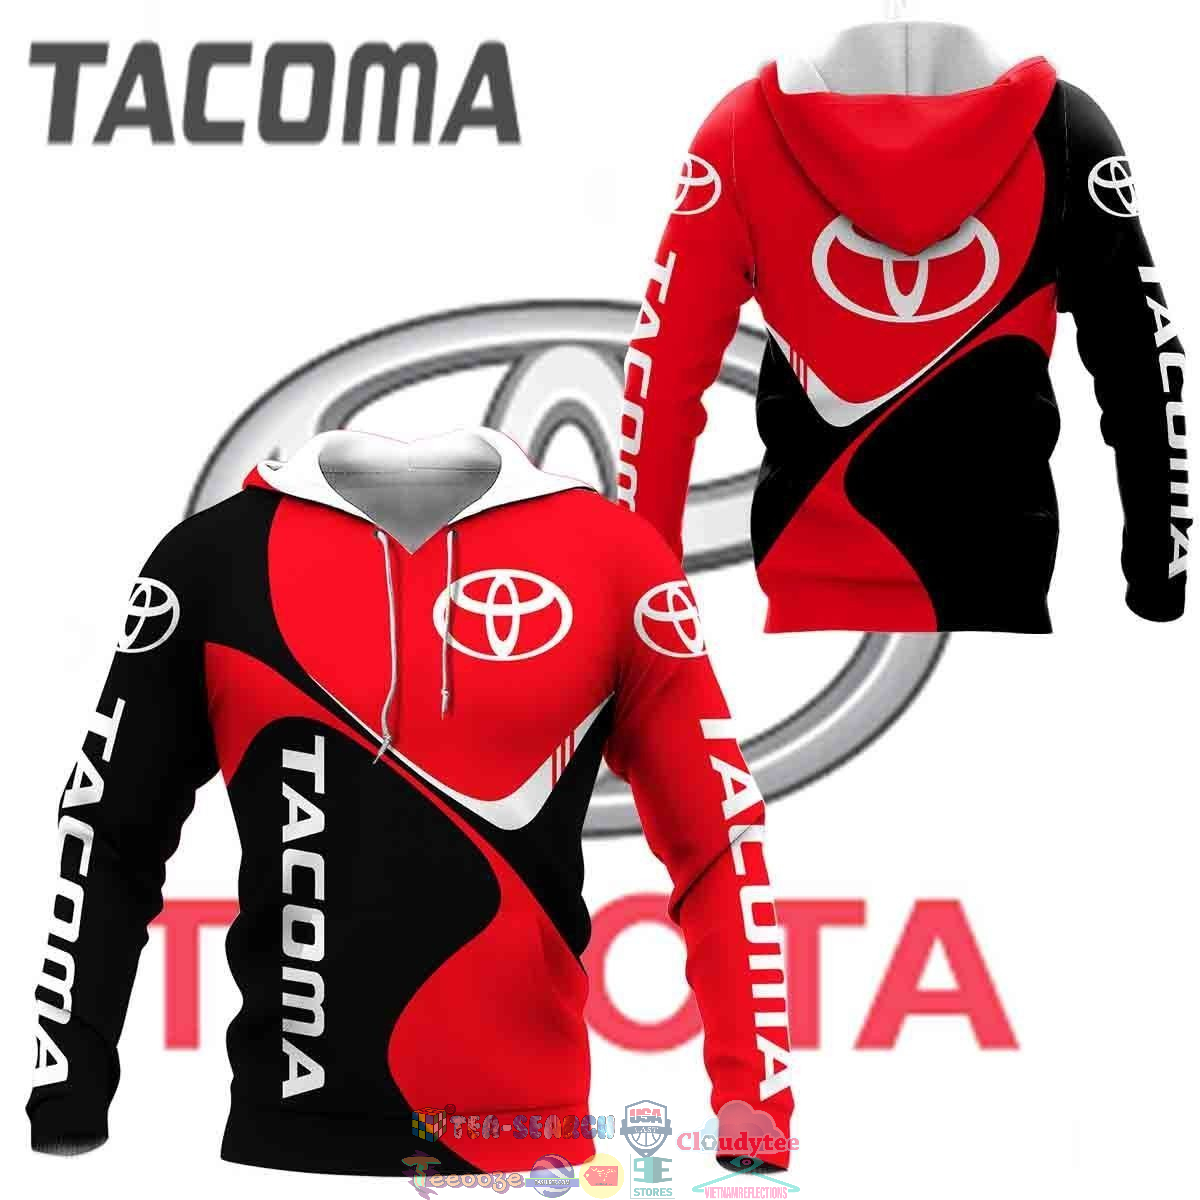 Toyota Tacoma ver 10 3D hoodie and t-shirt